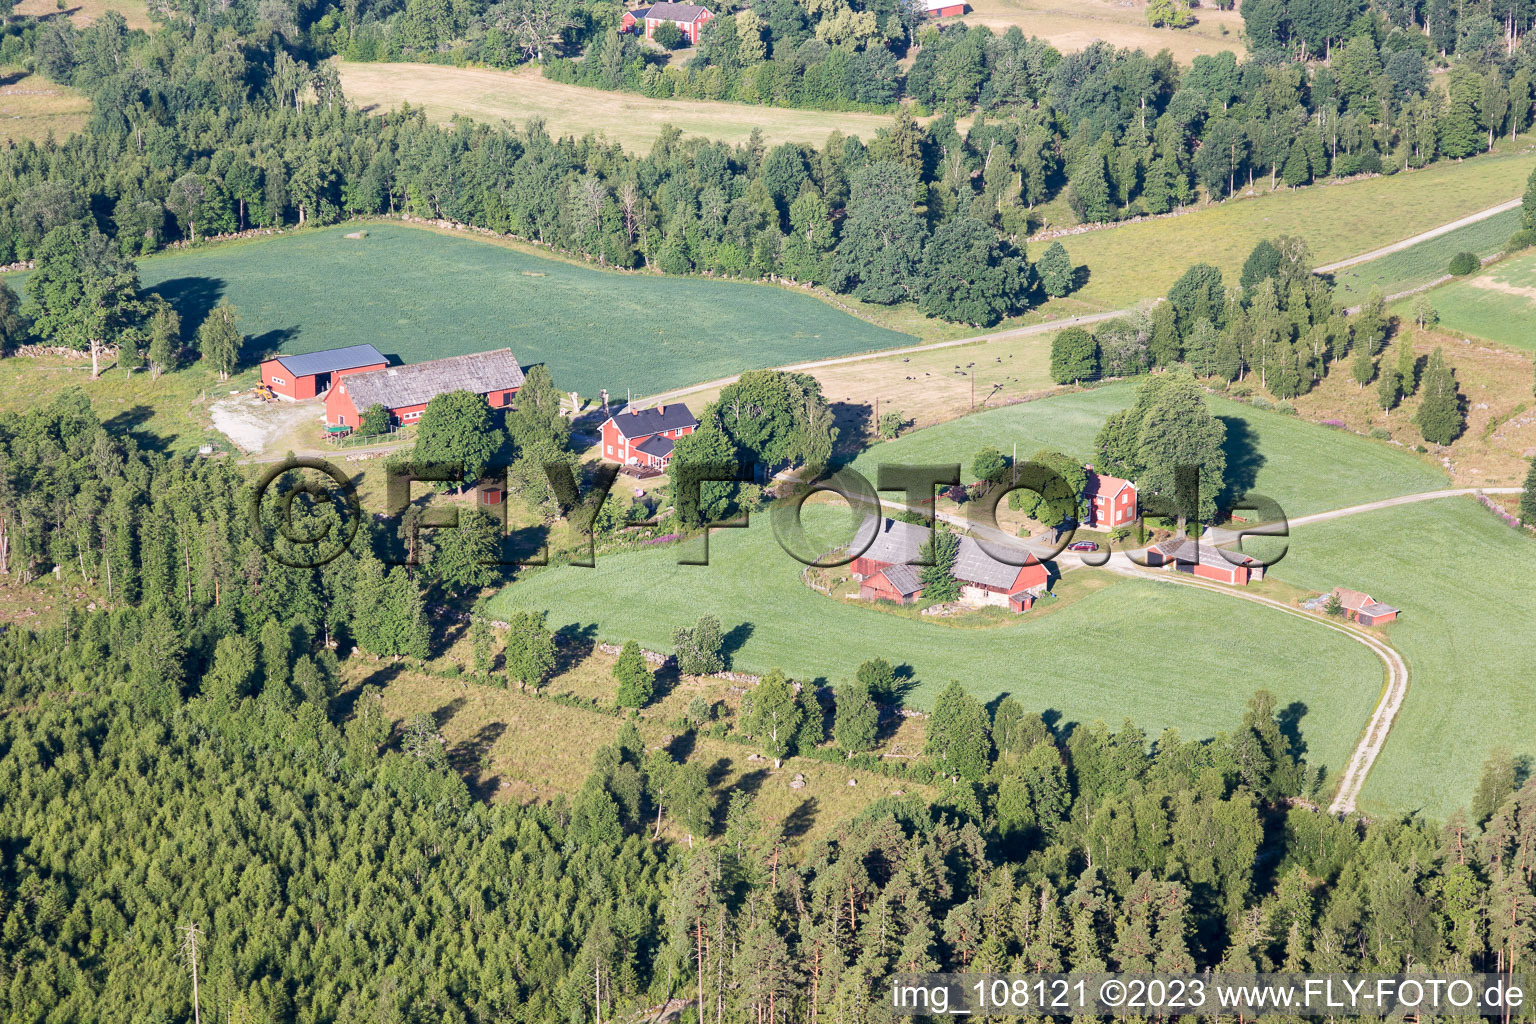 Aerial photograpy of Norra Arnön in the state Kronoberg, Sweden